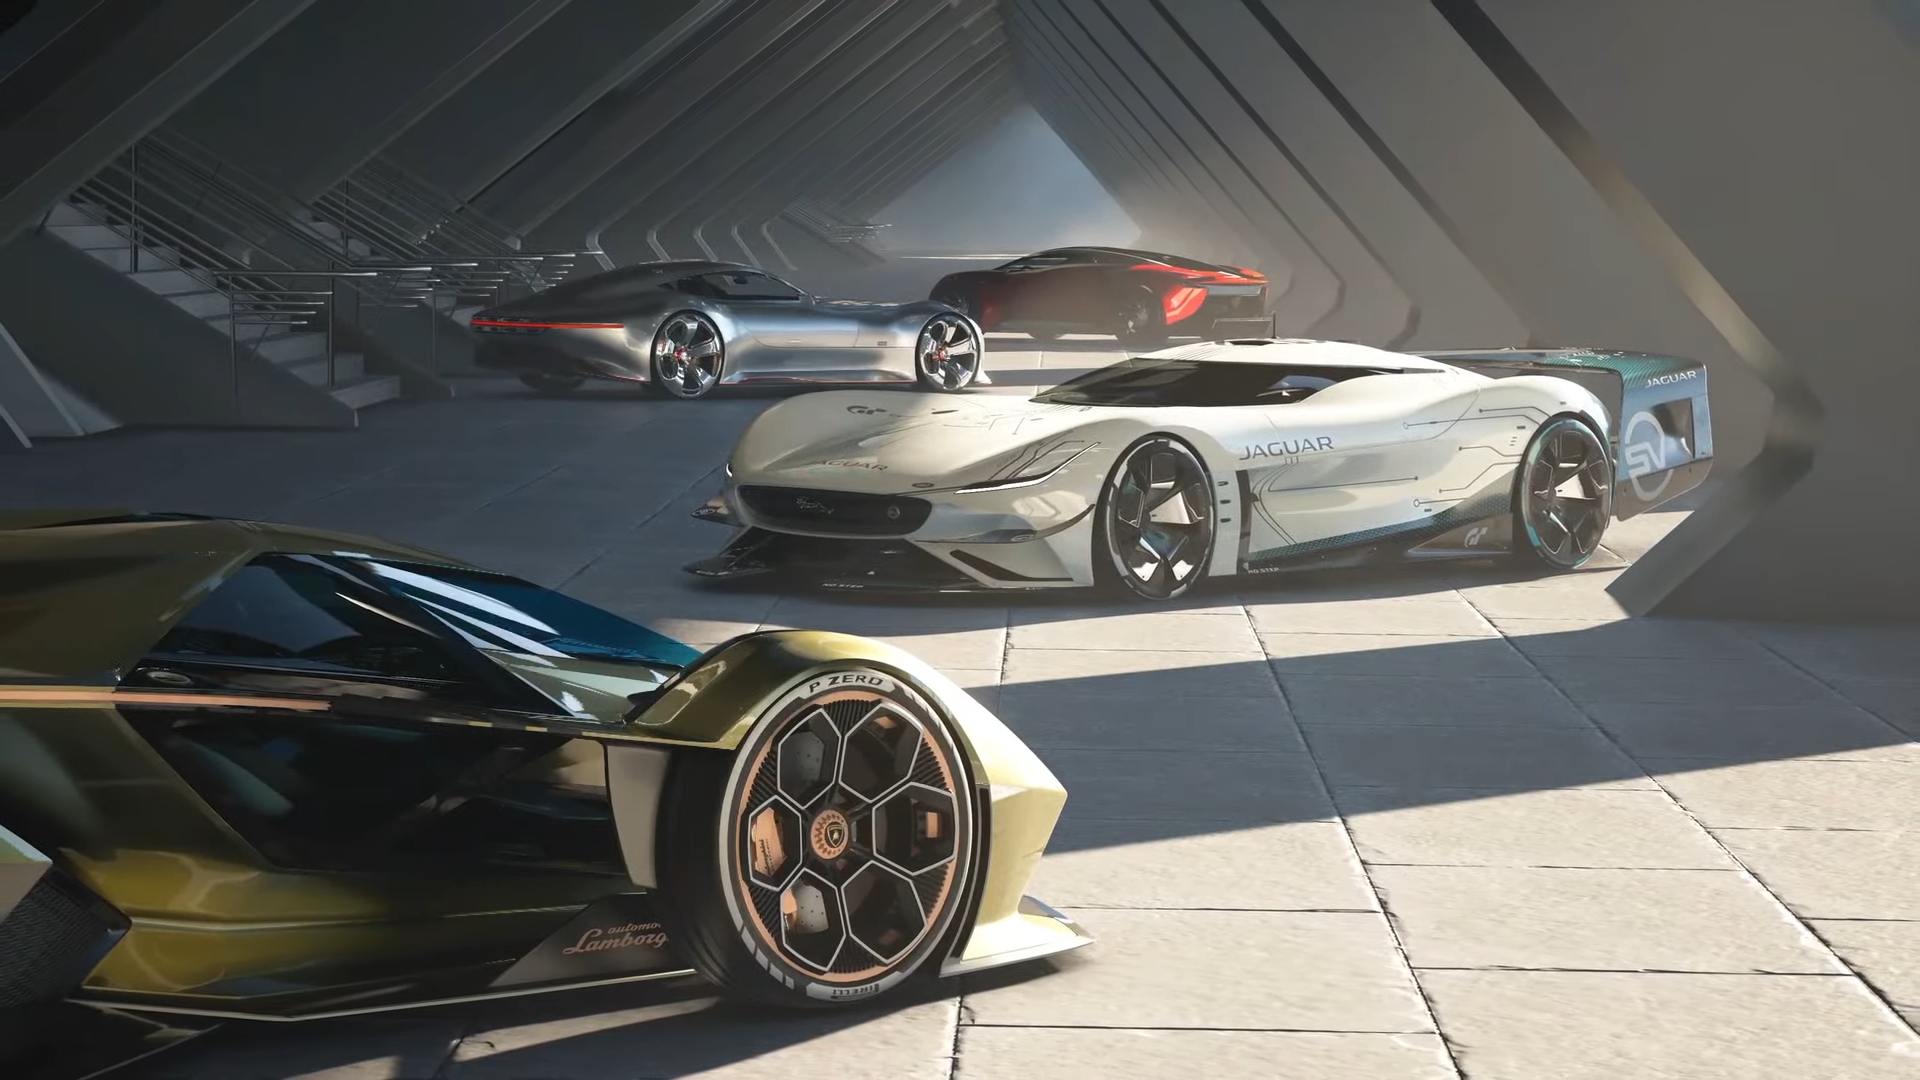 Here's Why Gran Turismo 7 Campaign Mode Requires Internet Connection